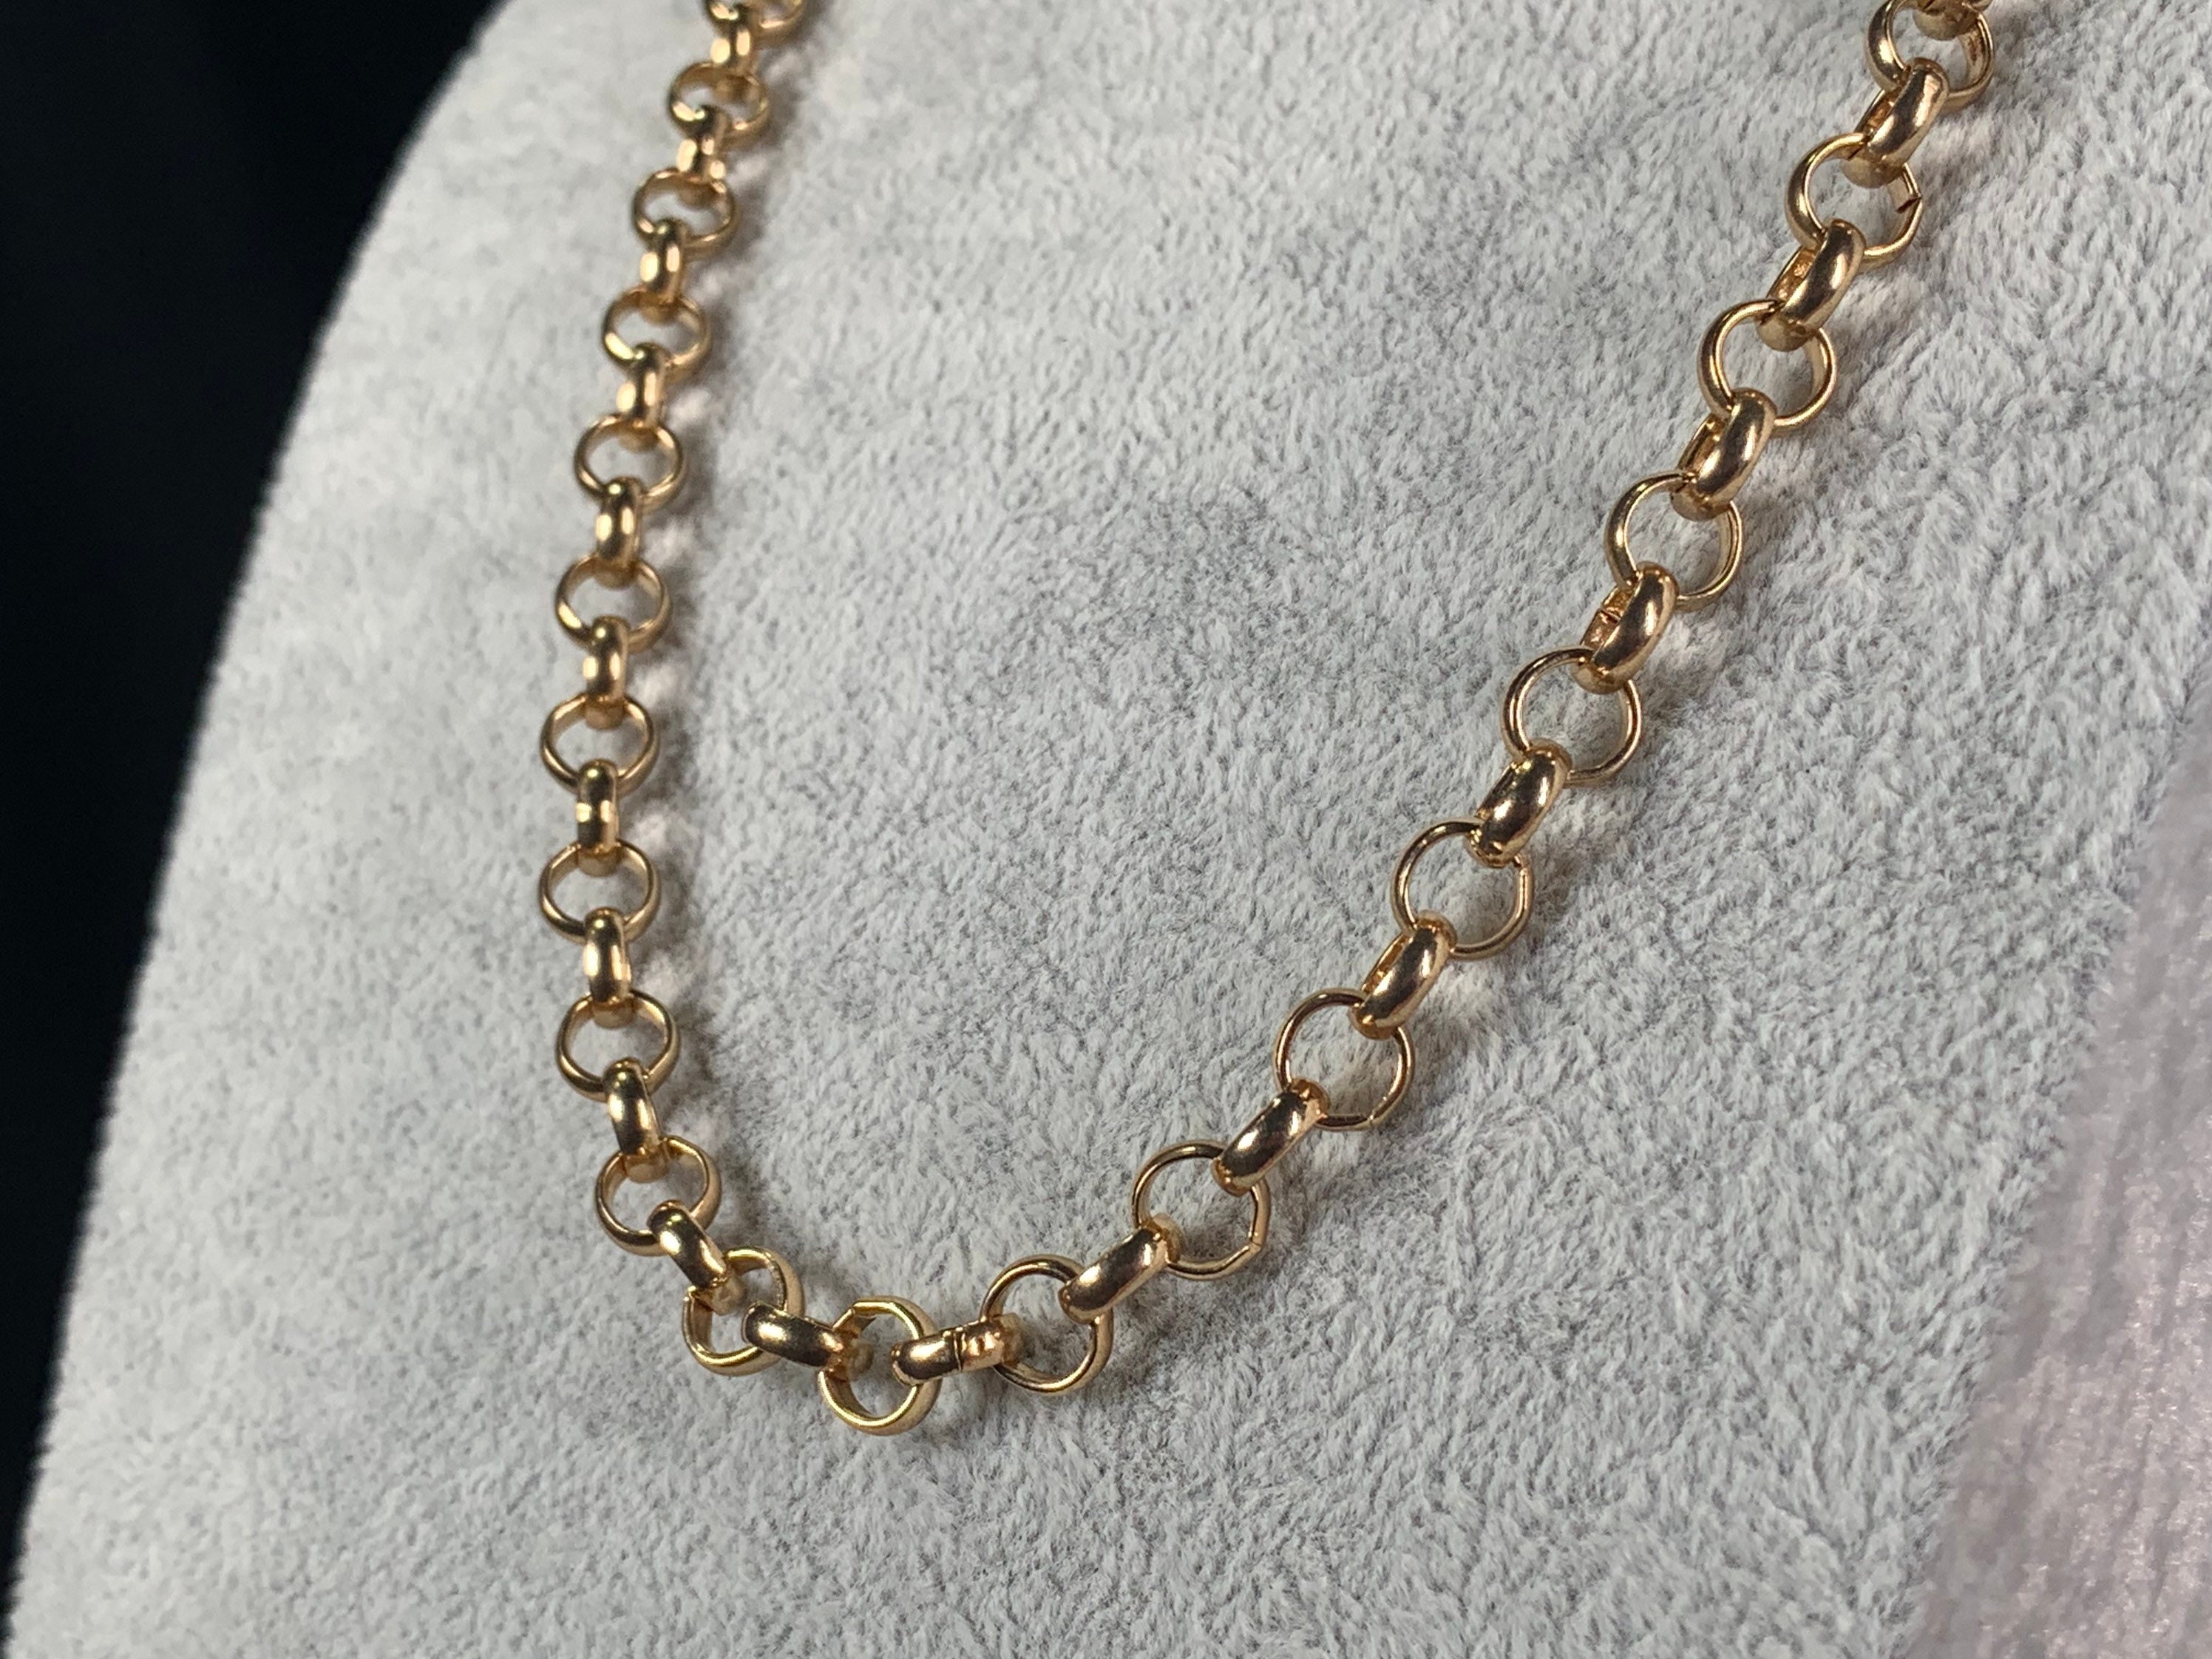 8mm 14k gold belcher chain necklace 26 inch triple plated. | Etsy